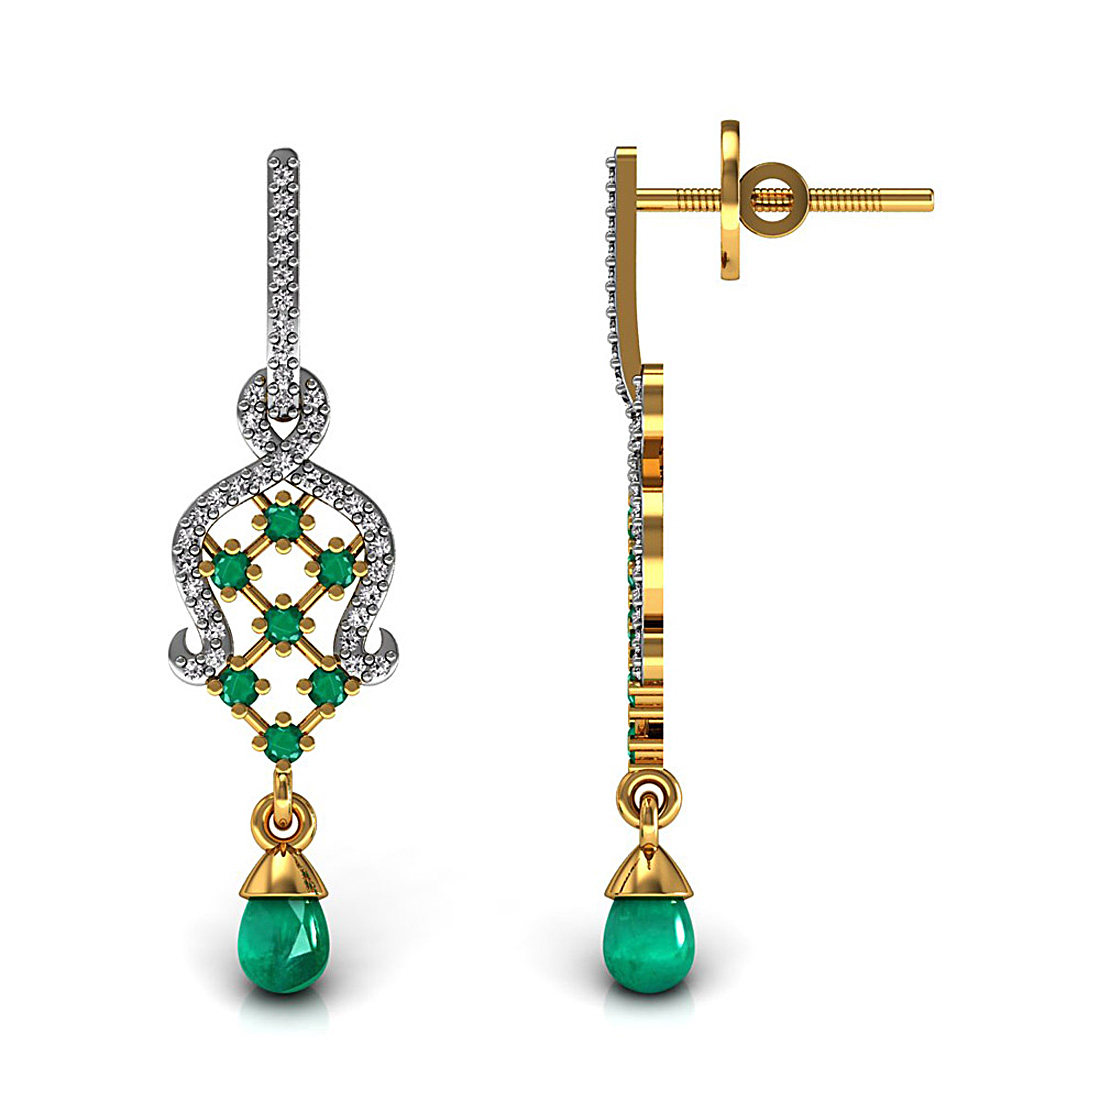 Natural emerald gemstone dangle drop earrings made in 18k solid yellow gold adorned with genuine diamond.